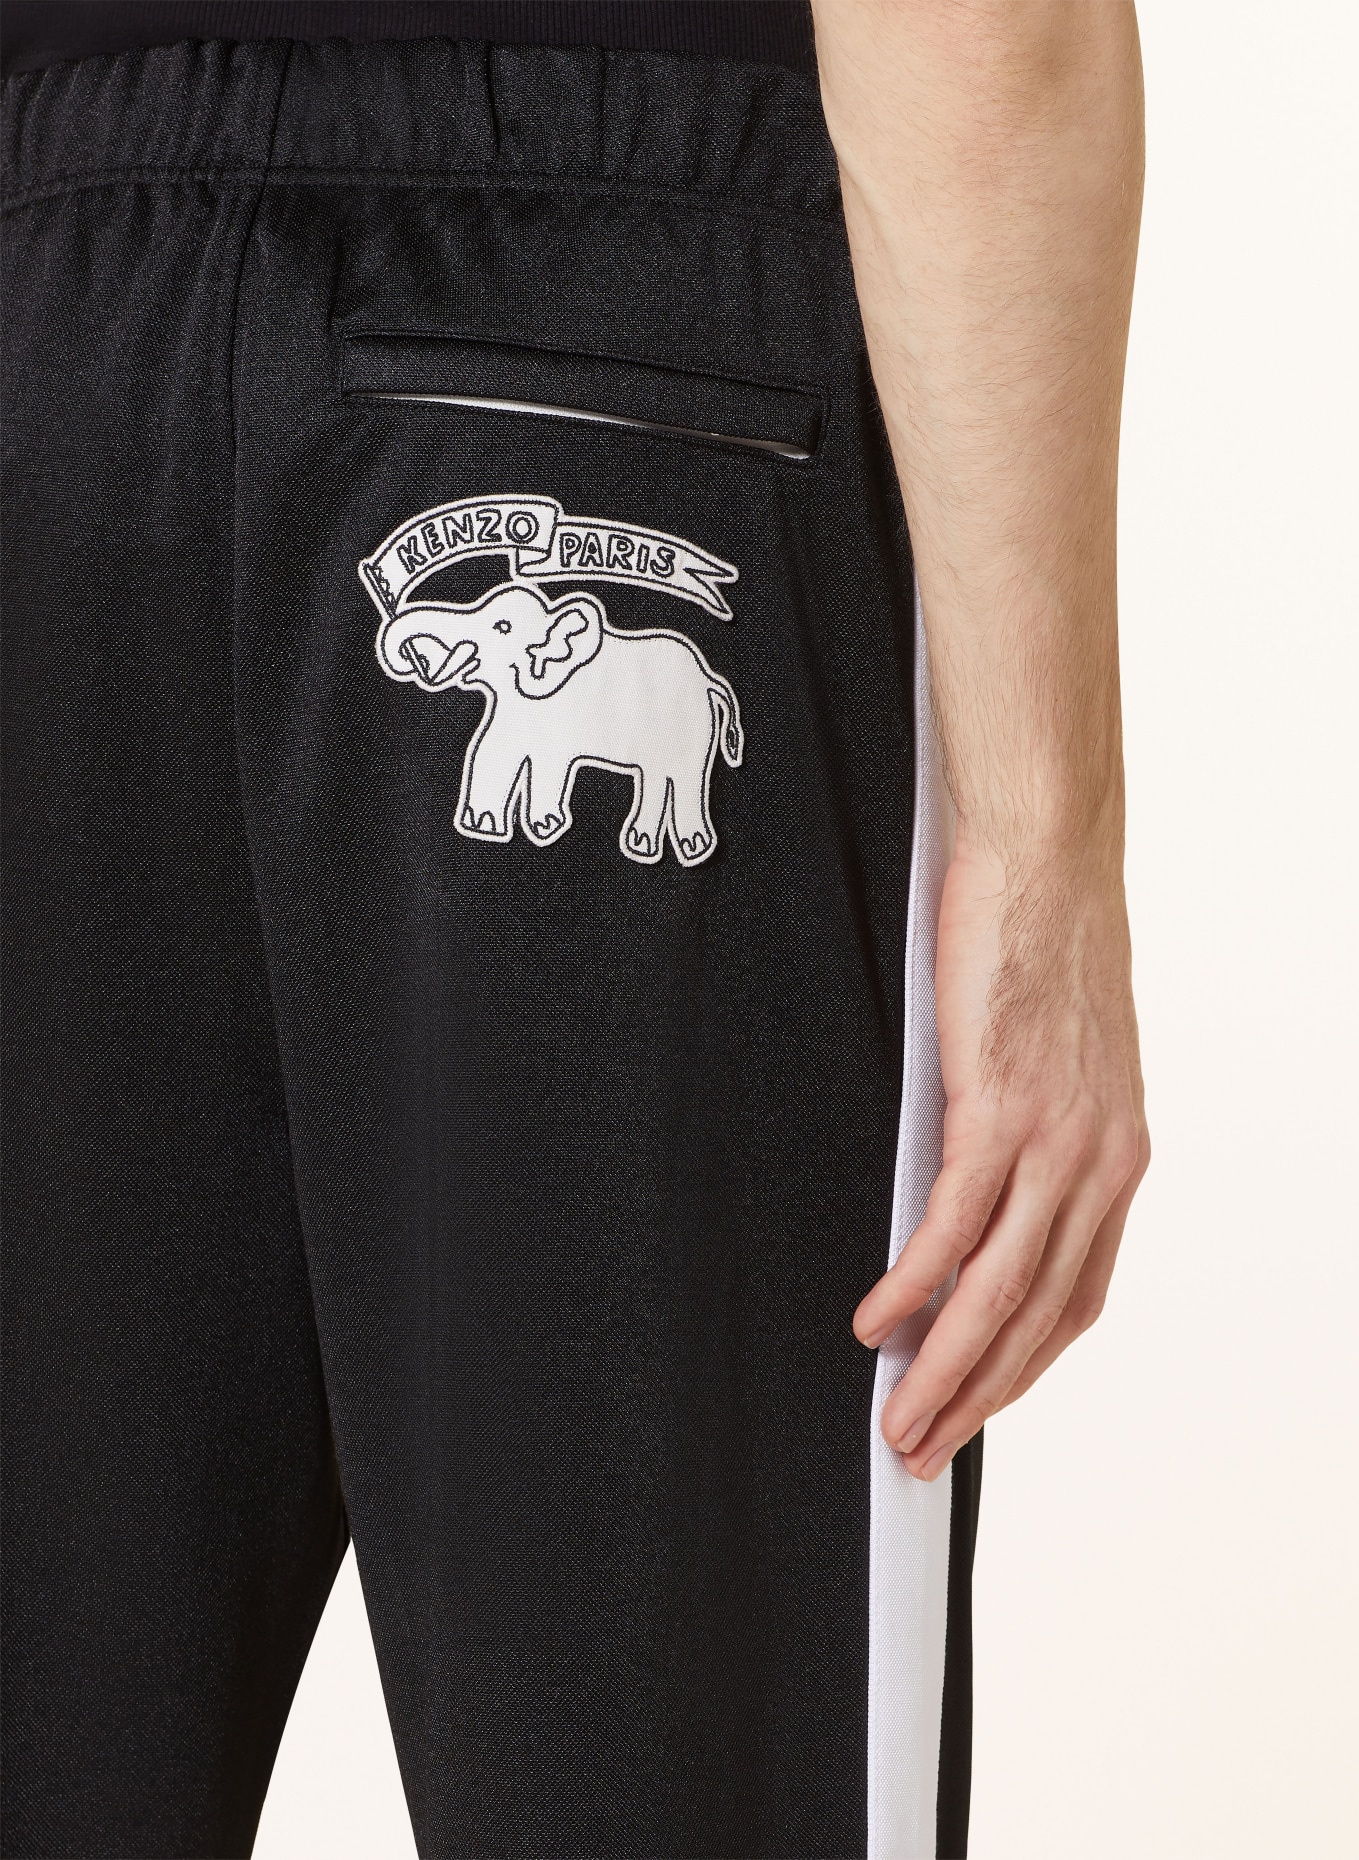 KENZO Pants in jogger style slim fit, Color: BLACK/ WHITE (Image 6)